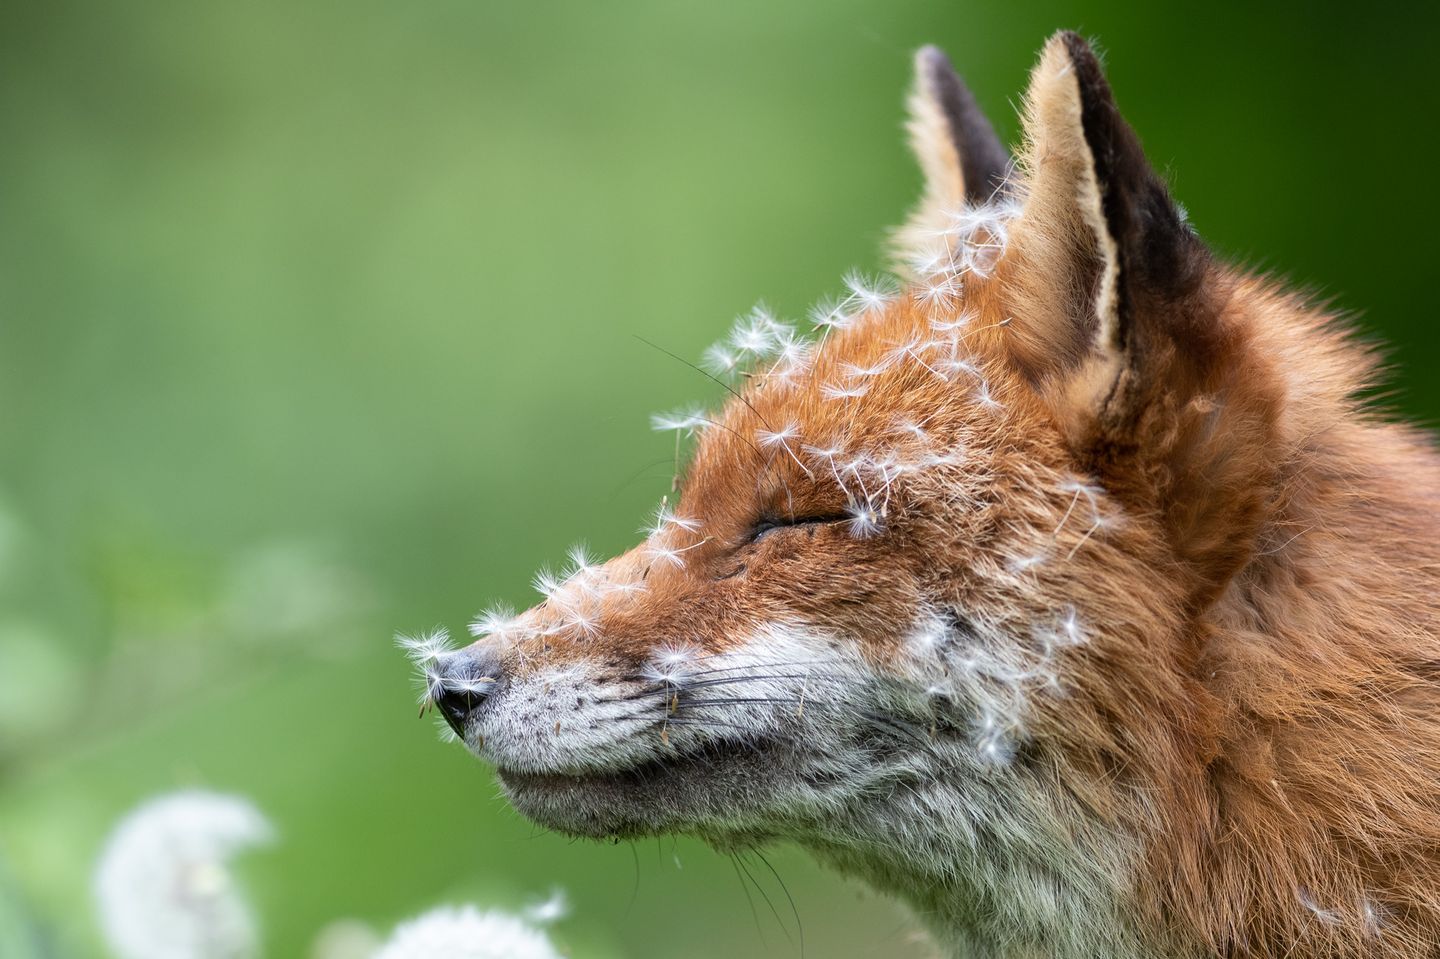 Sleeping With Dandelions Animal Portraits | Winner Lewis Newman Red fox (Vulpes vulpes) London, England  Nikon D500 with Nikon 300mm f/2.8 lens. 300mm; 1/800th second; f/4; ISO 640.  After spending a lot of time with this particular vixen, she began to learn I was not a threat. This gave me some great photographic opportunities. I got to know her routine, and as the wildflowers began to grow, I would find her curled up amongst them. As the dandelions began to open there were a couple of days when she would wake up covered in them.